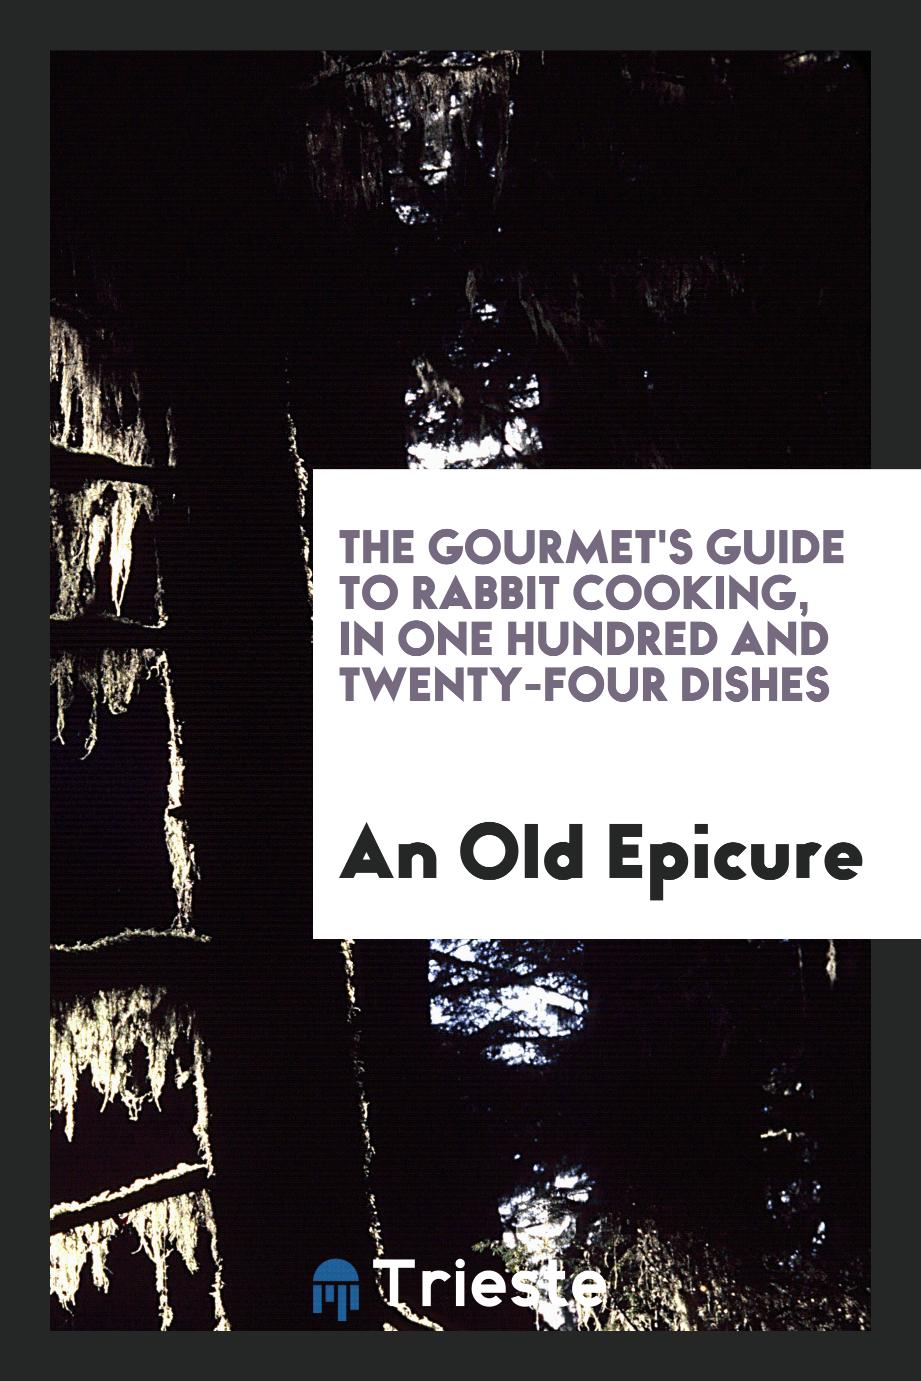 The Gourmet's Guide to Rabbit Cooking, in One Hundred and Twenty-Four Dishes